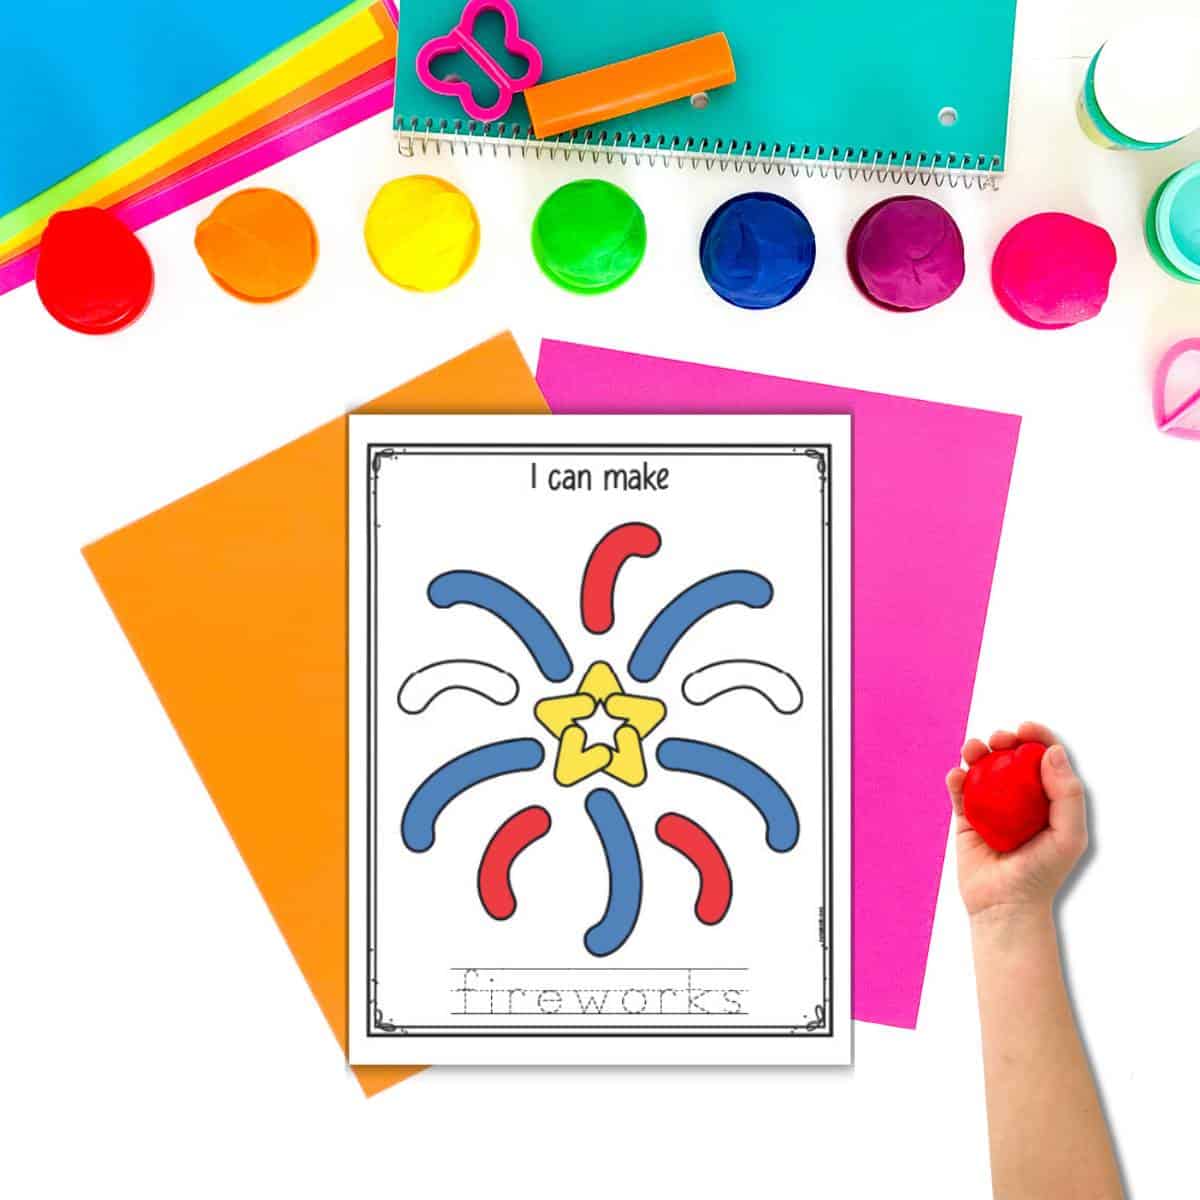 A top down image of paper and play dough with a child's hand holding a ball of red play dough. A play dough activity mat with fireworks is on top of other brightly colored pieces of paper.